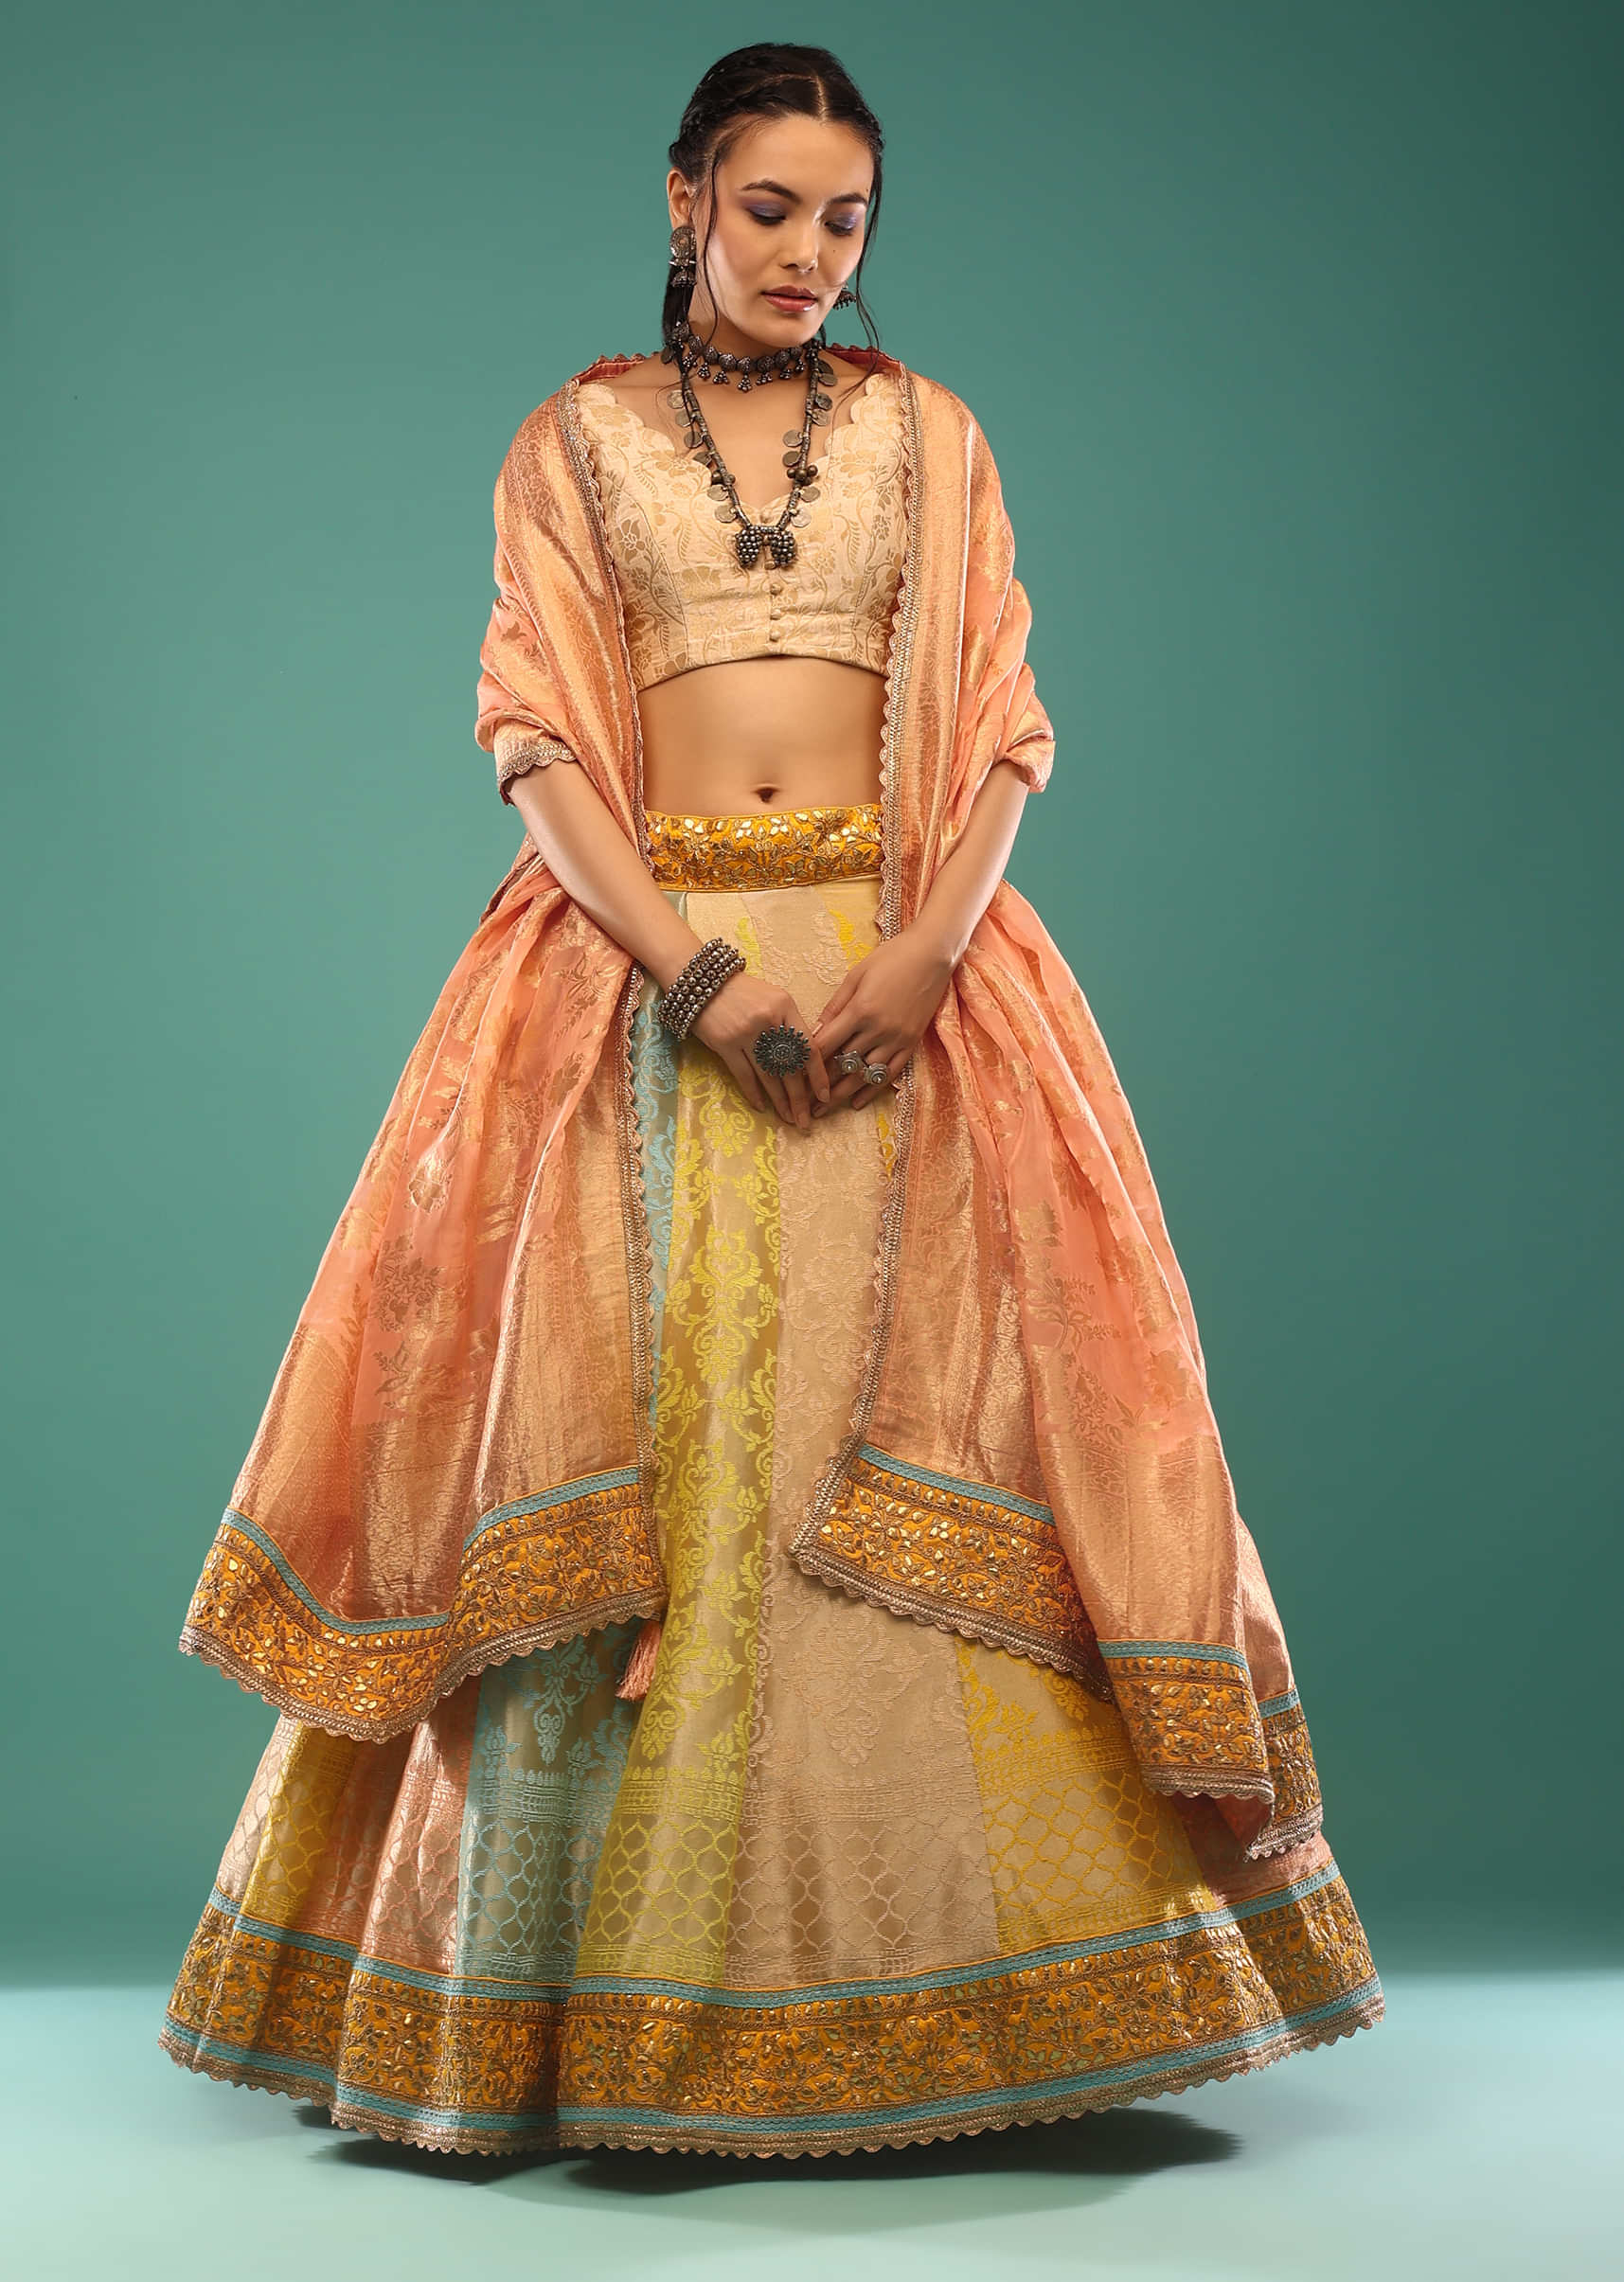 Multi-Colored Brocade Lehenga In Gotta Patti Embroidery,Paired With The Choli And Dupatta In Gotta Patti And Moti Embroidery